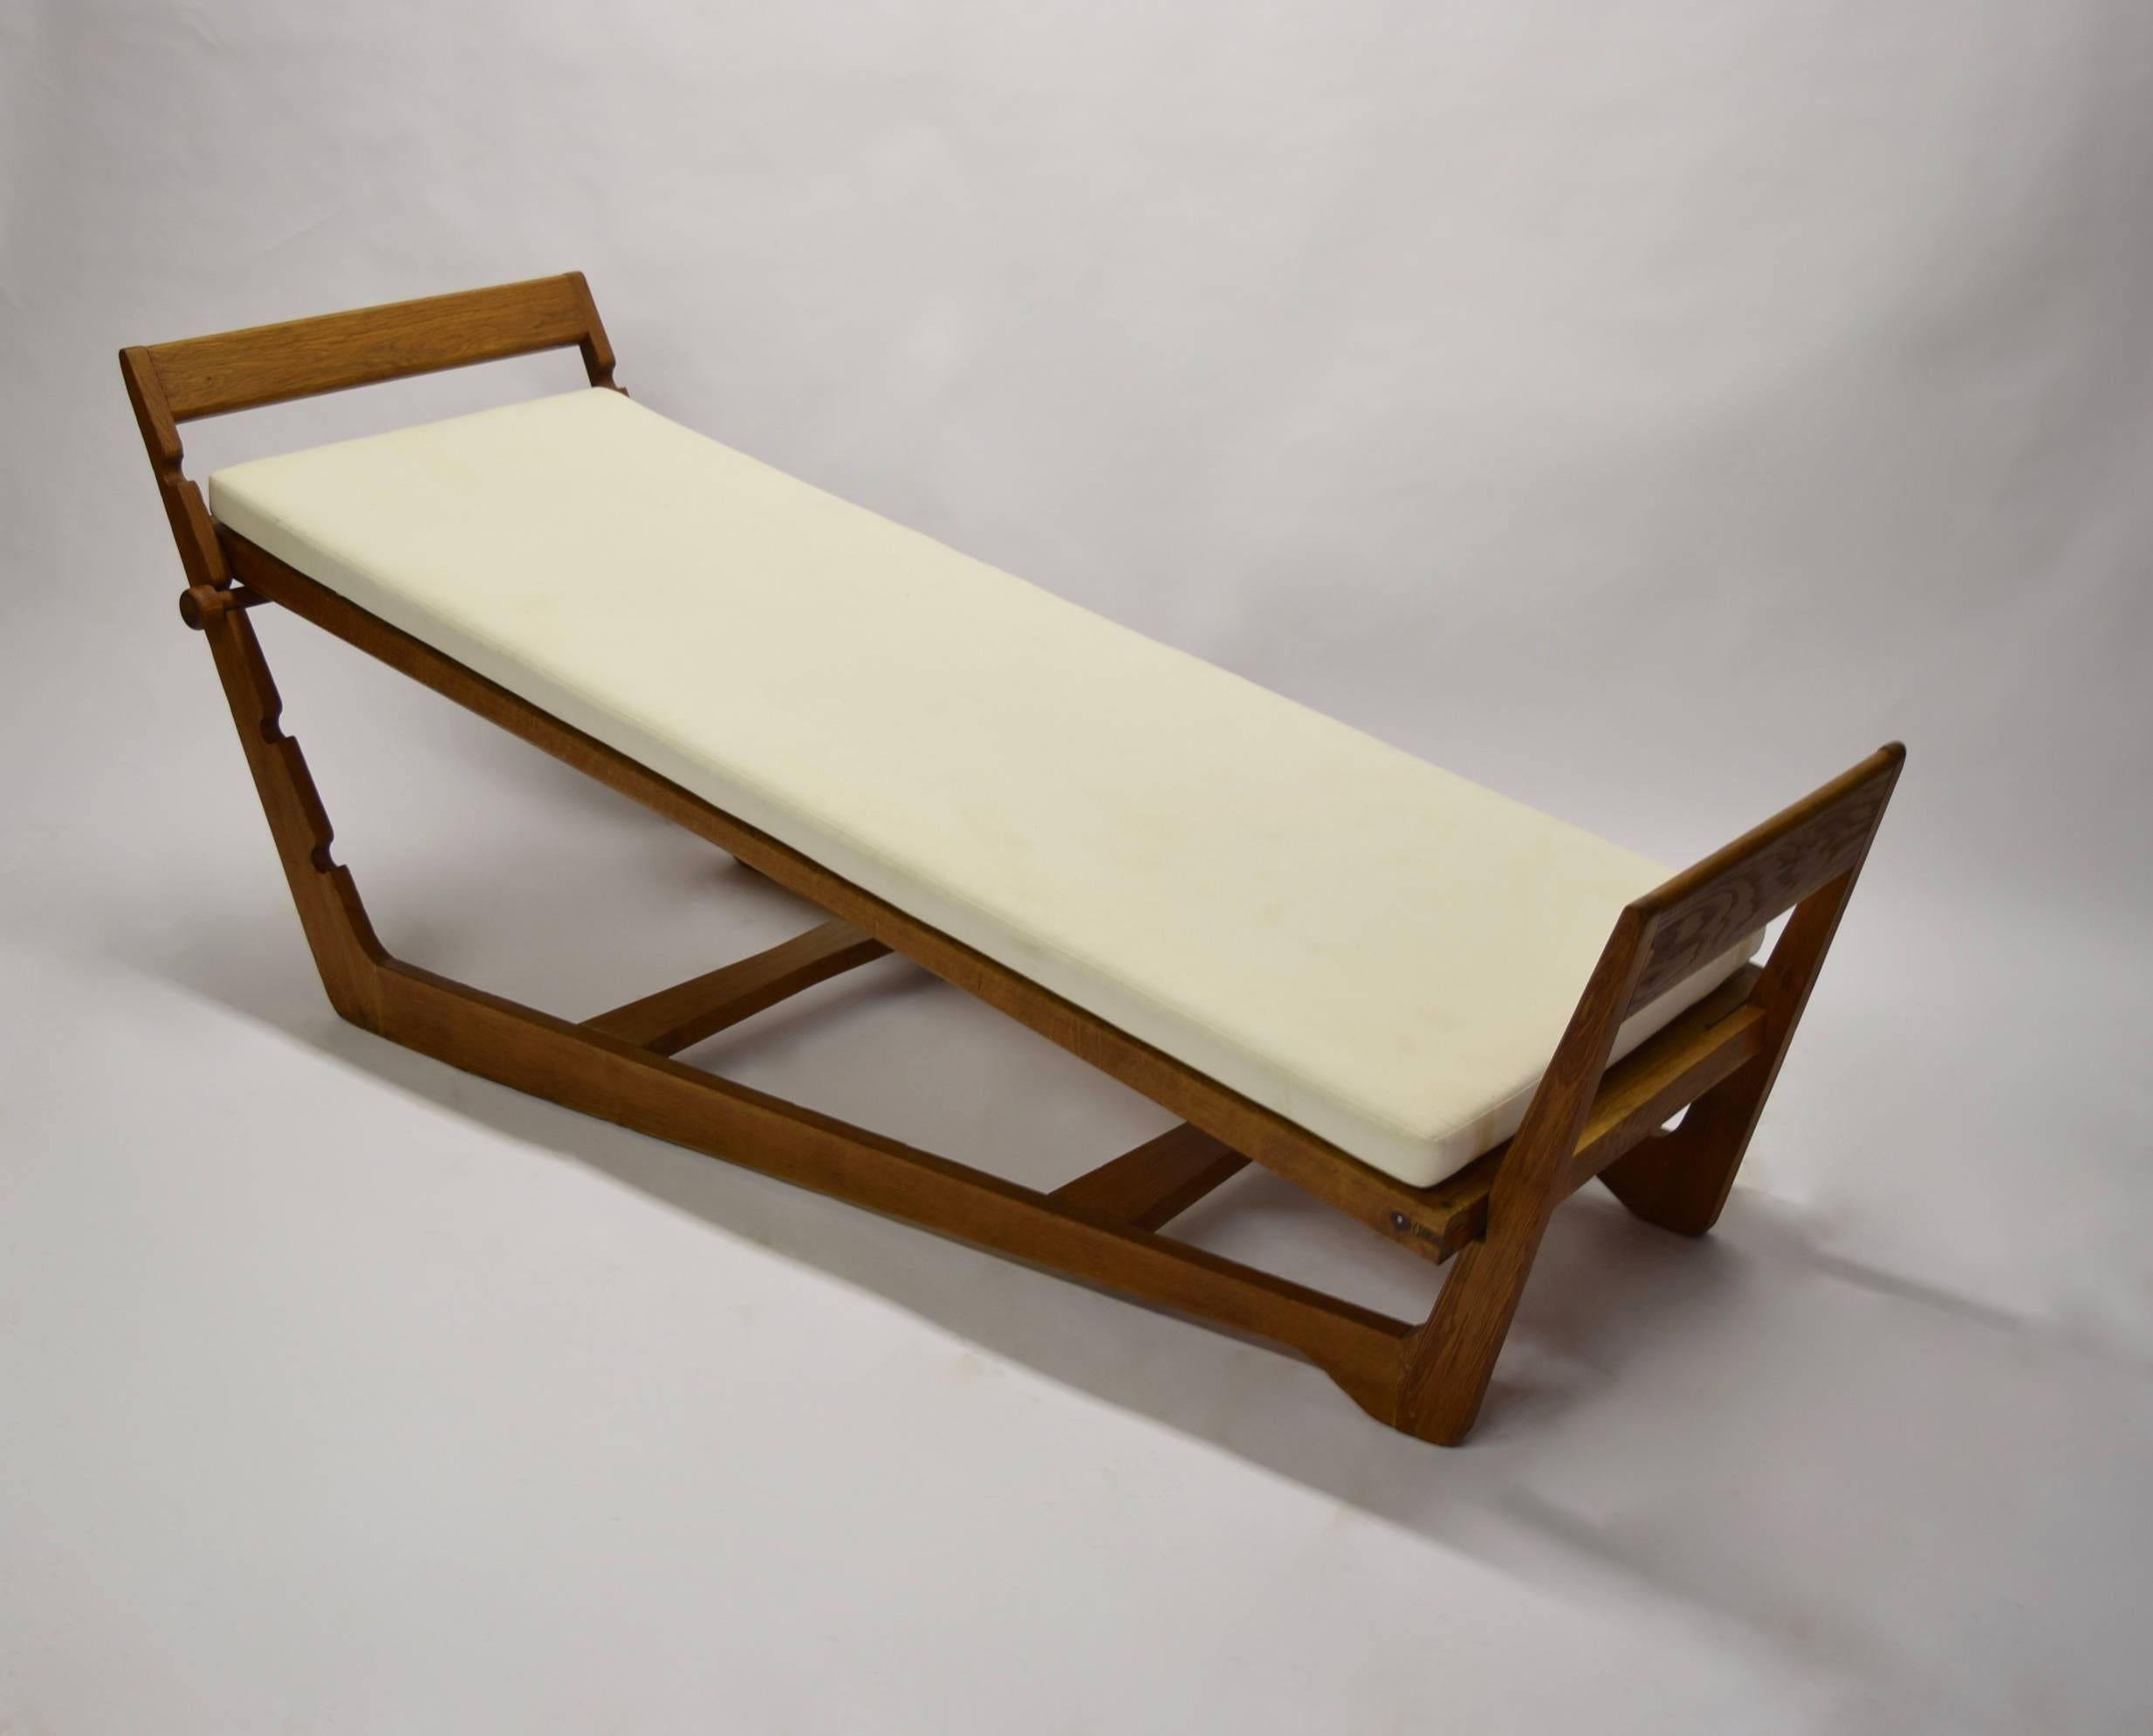 Solid oak daybed with a muslin seat cushion. The frame has four sets of, hand carved, notches. Each set of notches determines the incline of the cushion. The fifth setting is achieved by resting the cushion flat into the frame, having no incline. A